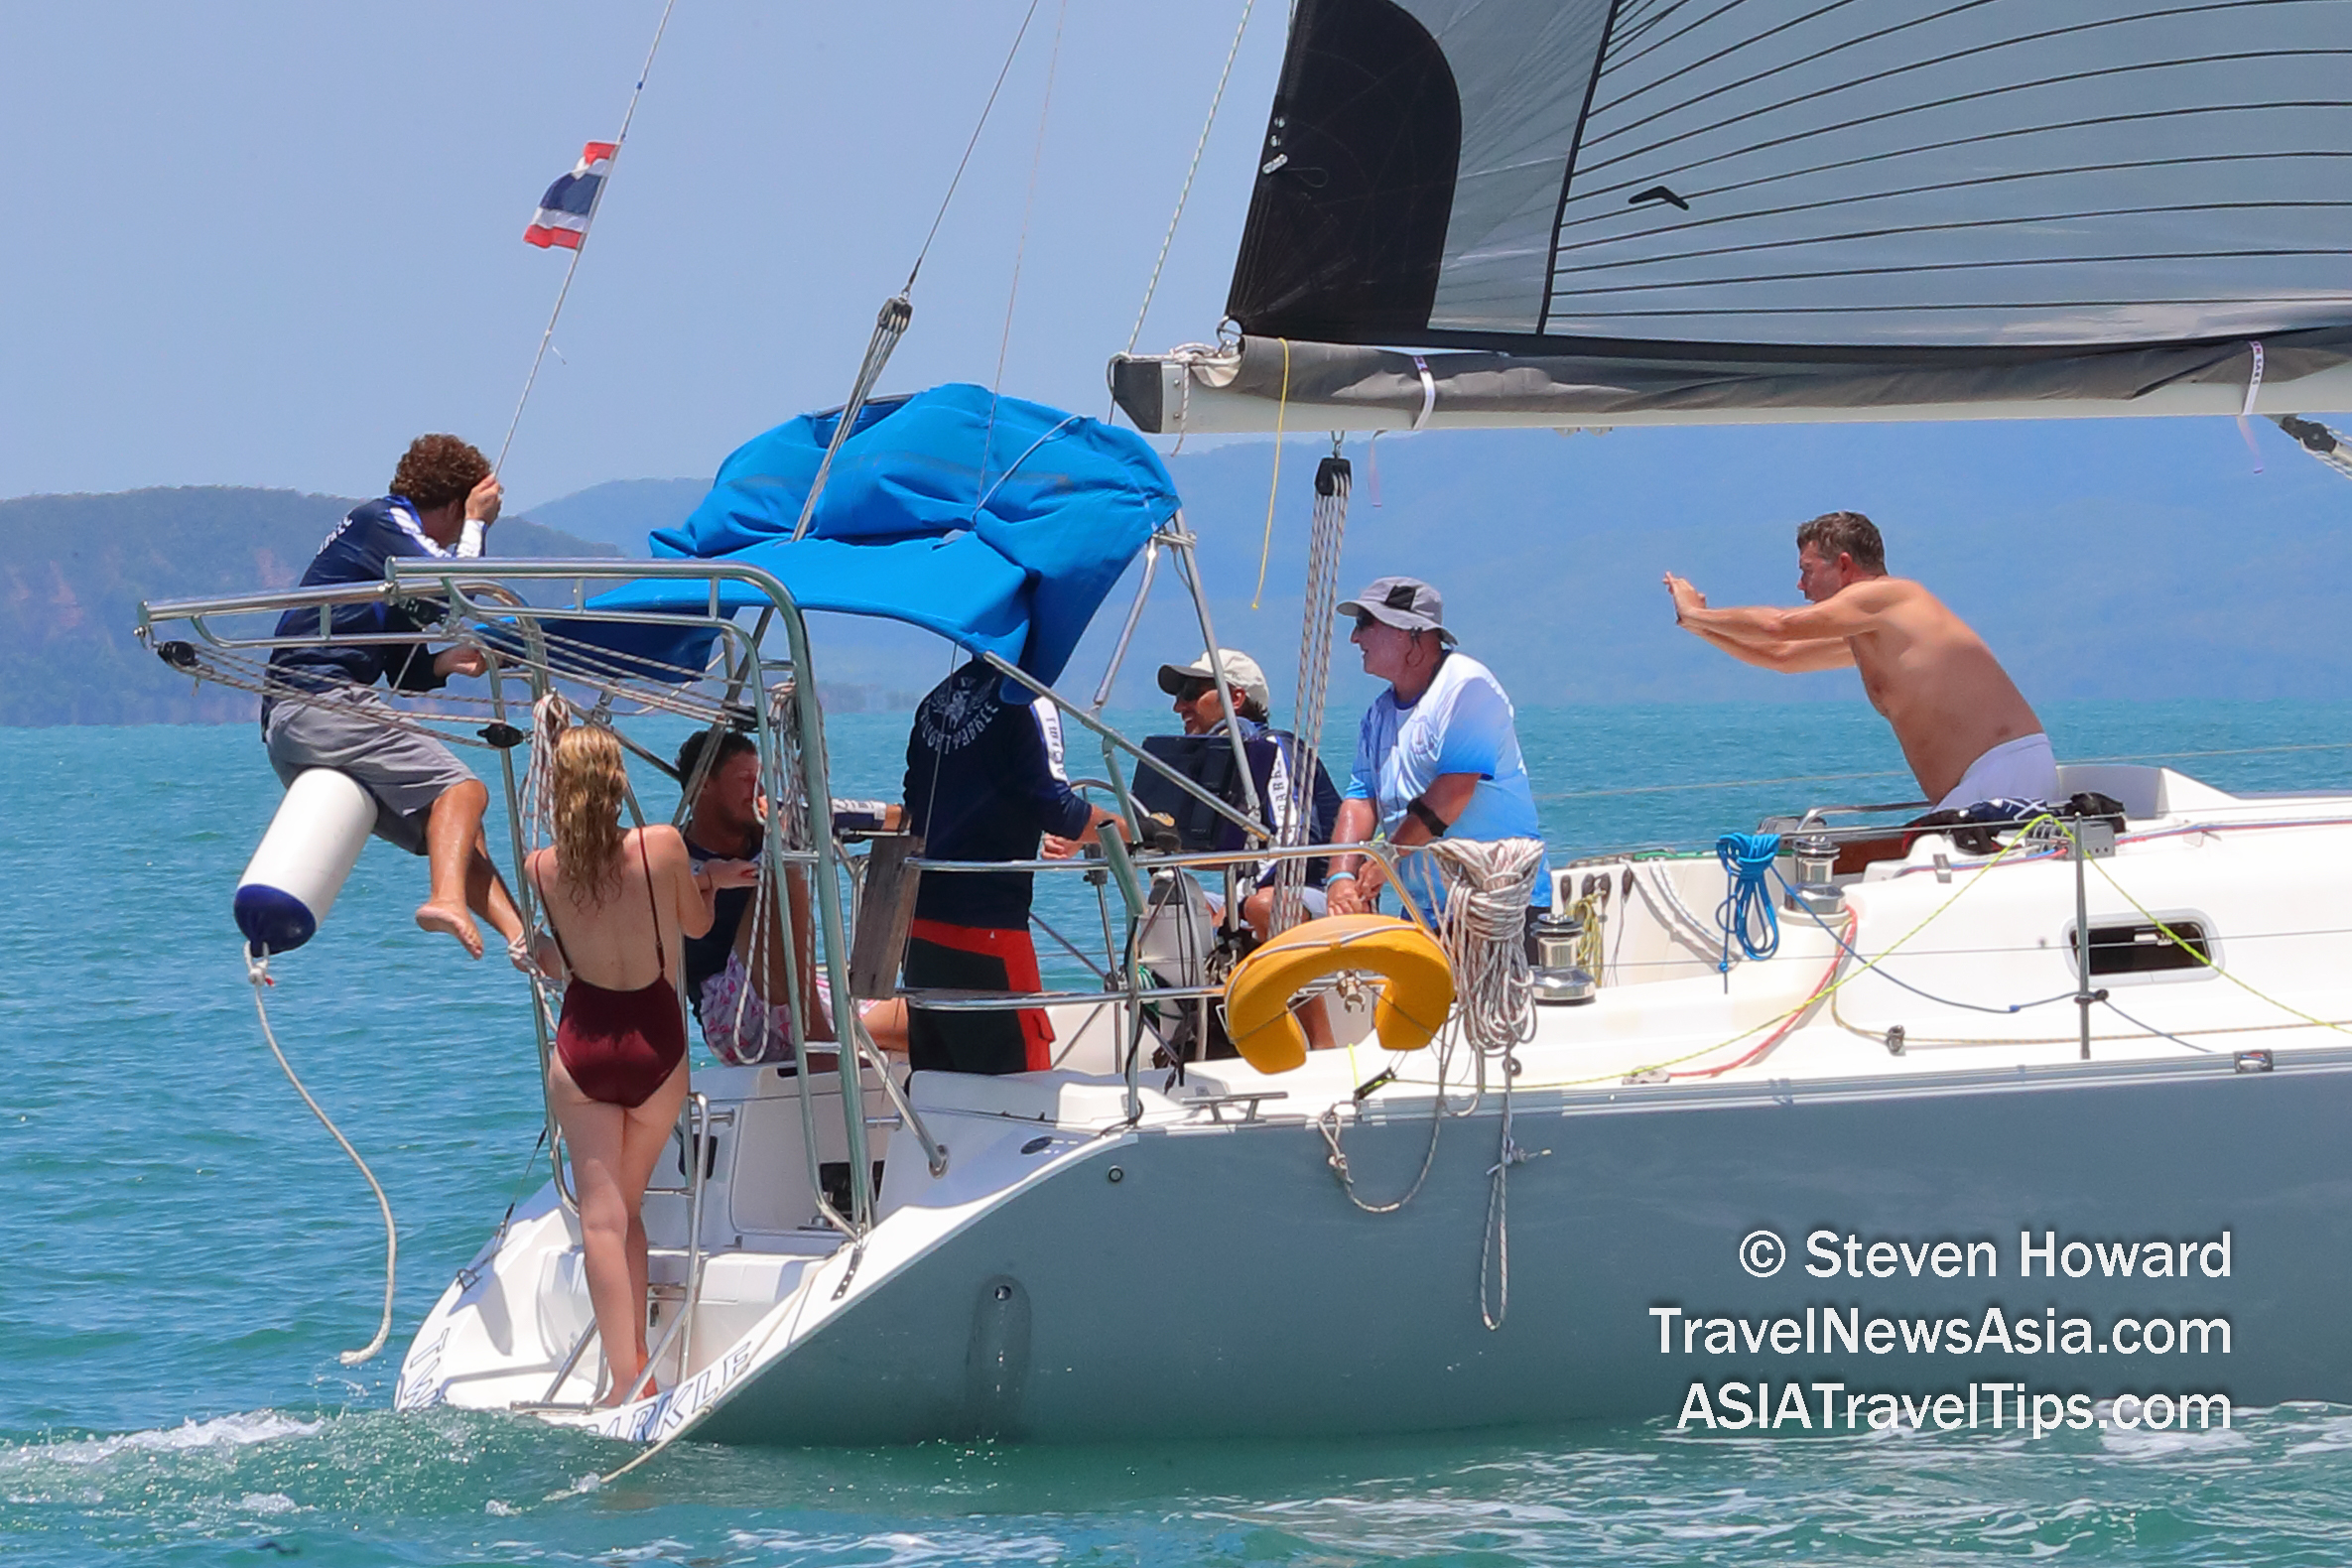 Some teams used the downtime in sailing for a little fun in the sun. Picture by Steven Howard of TravelNewsAsia.com. Click to enlarge.